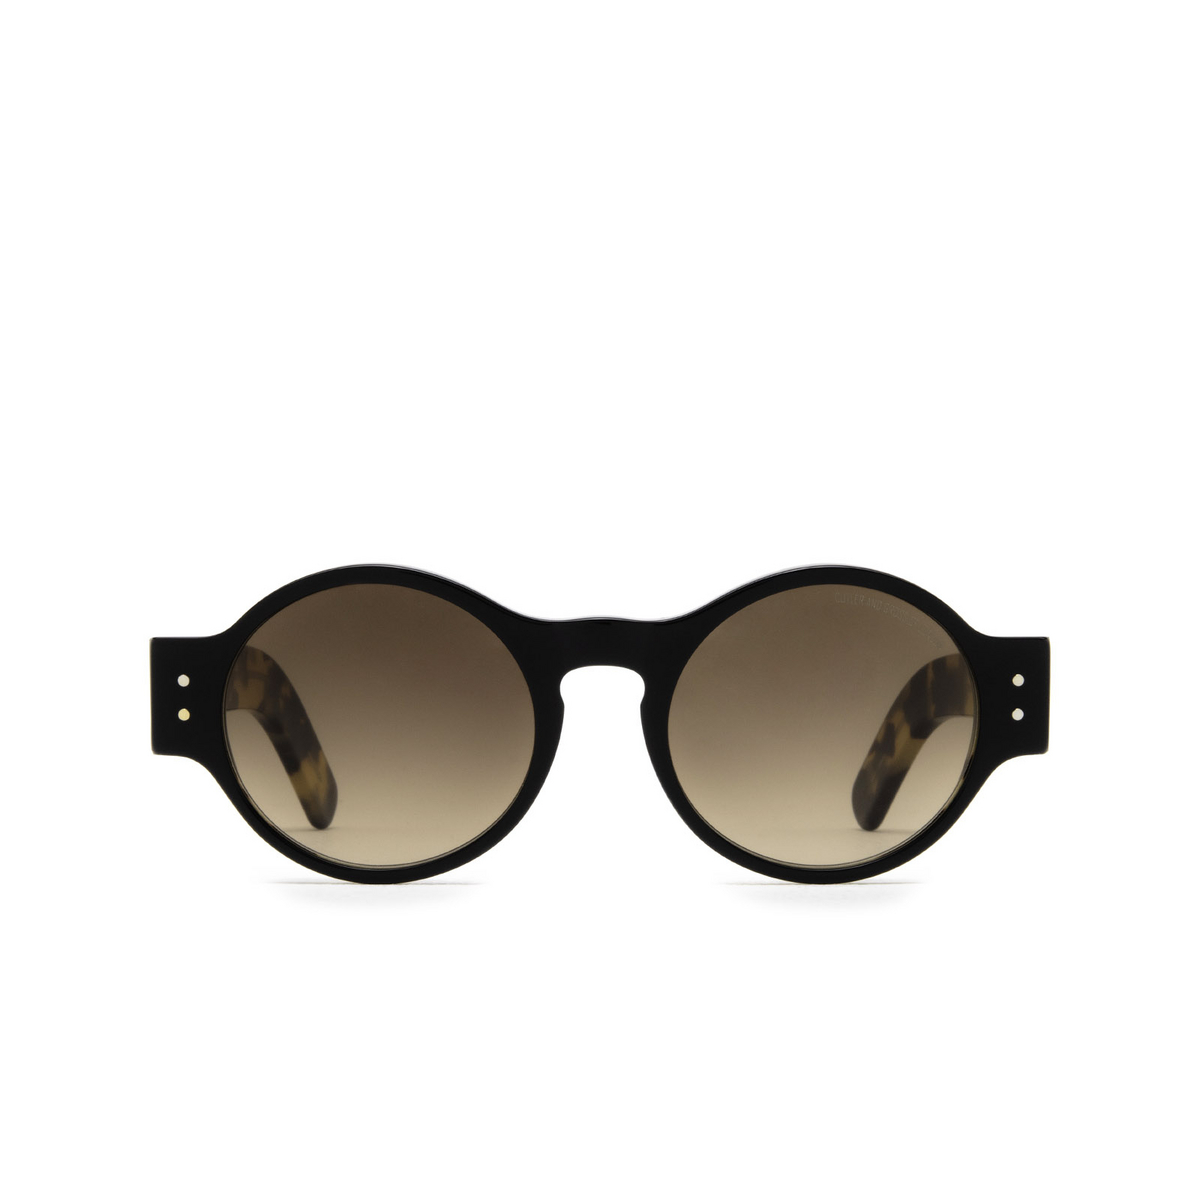 Cutler and Gross 1374 Sunglasses 02 Black on Camo - front view